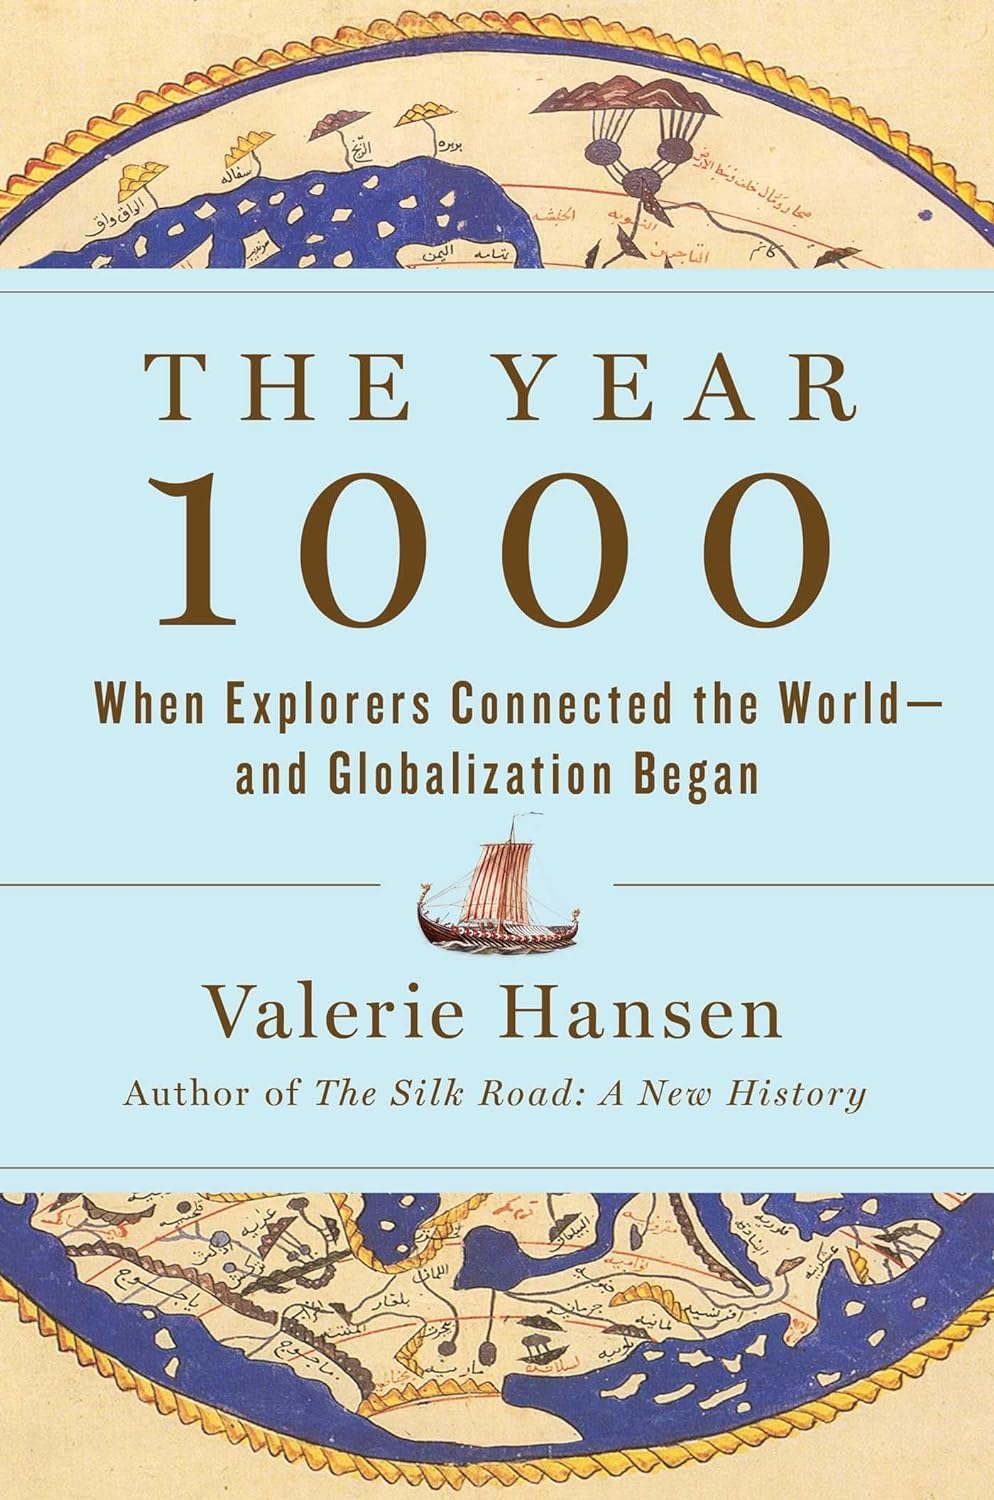 The Year 1000: When Explorers Connected the World―and Globalization Began